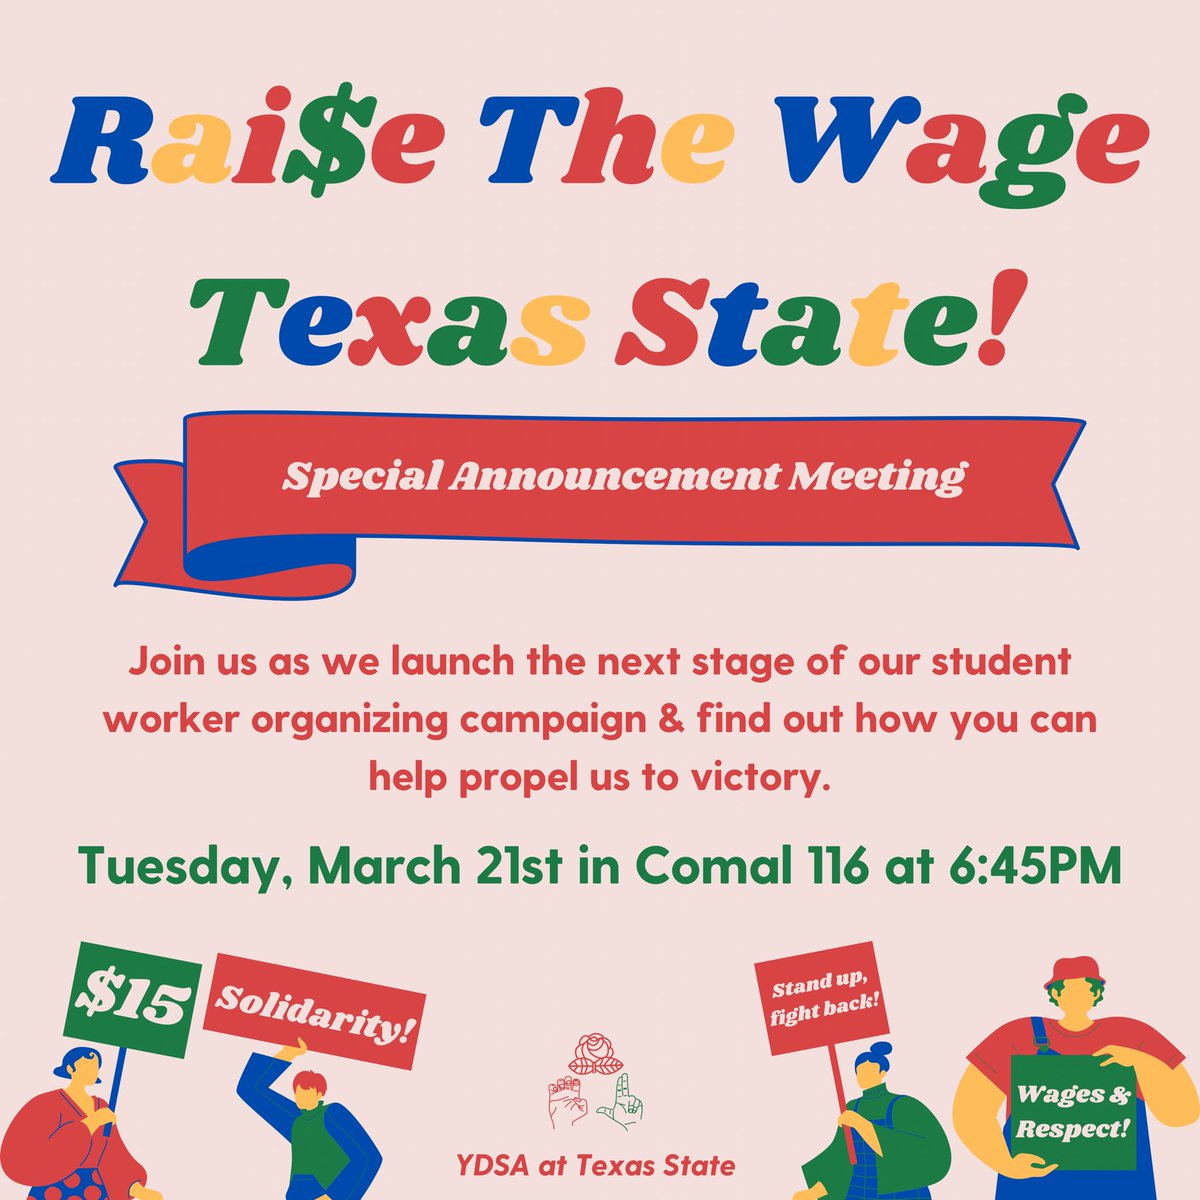 Howdy folks! We have an exciting announcement to make as we move into the next phase of our student worker organizing campaign. Join us Tuesday, March 21st at 6:45PM in Comal 116 to hear all about it & how you can get involved this week! ❤️💛💚💙